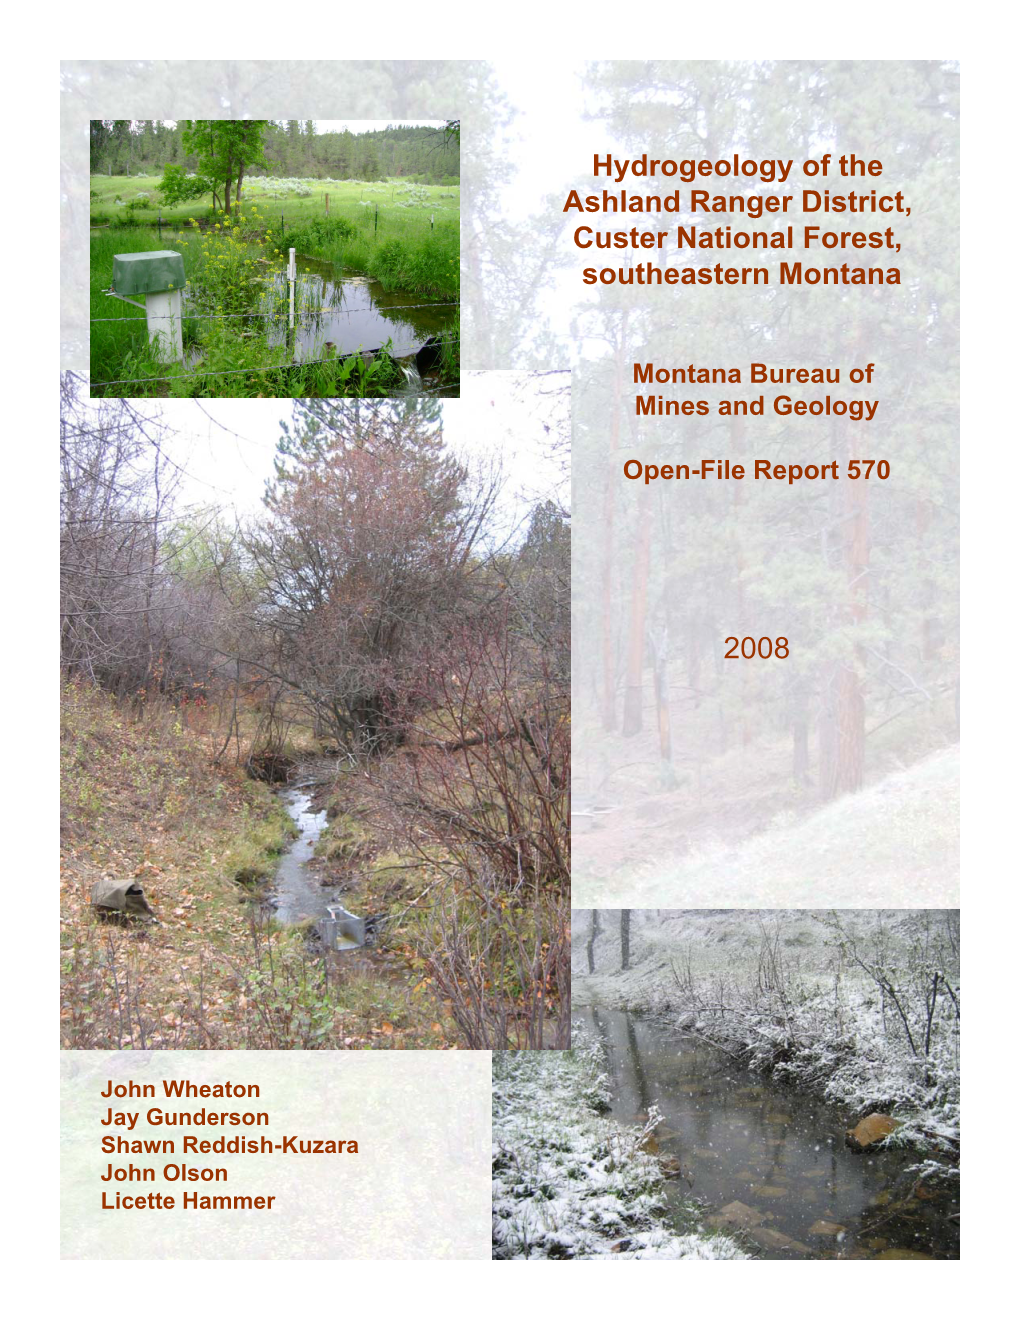 2008 Hydrogeology of the Ashland Ranger District, Custer National Forest, Southeastern Montana